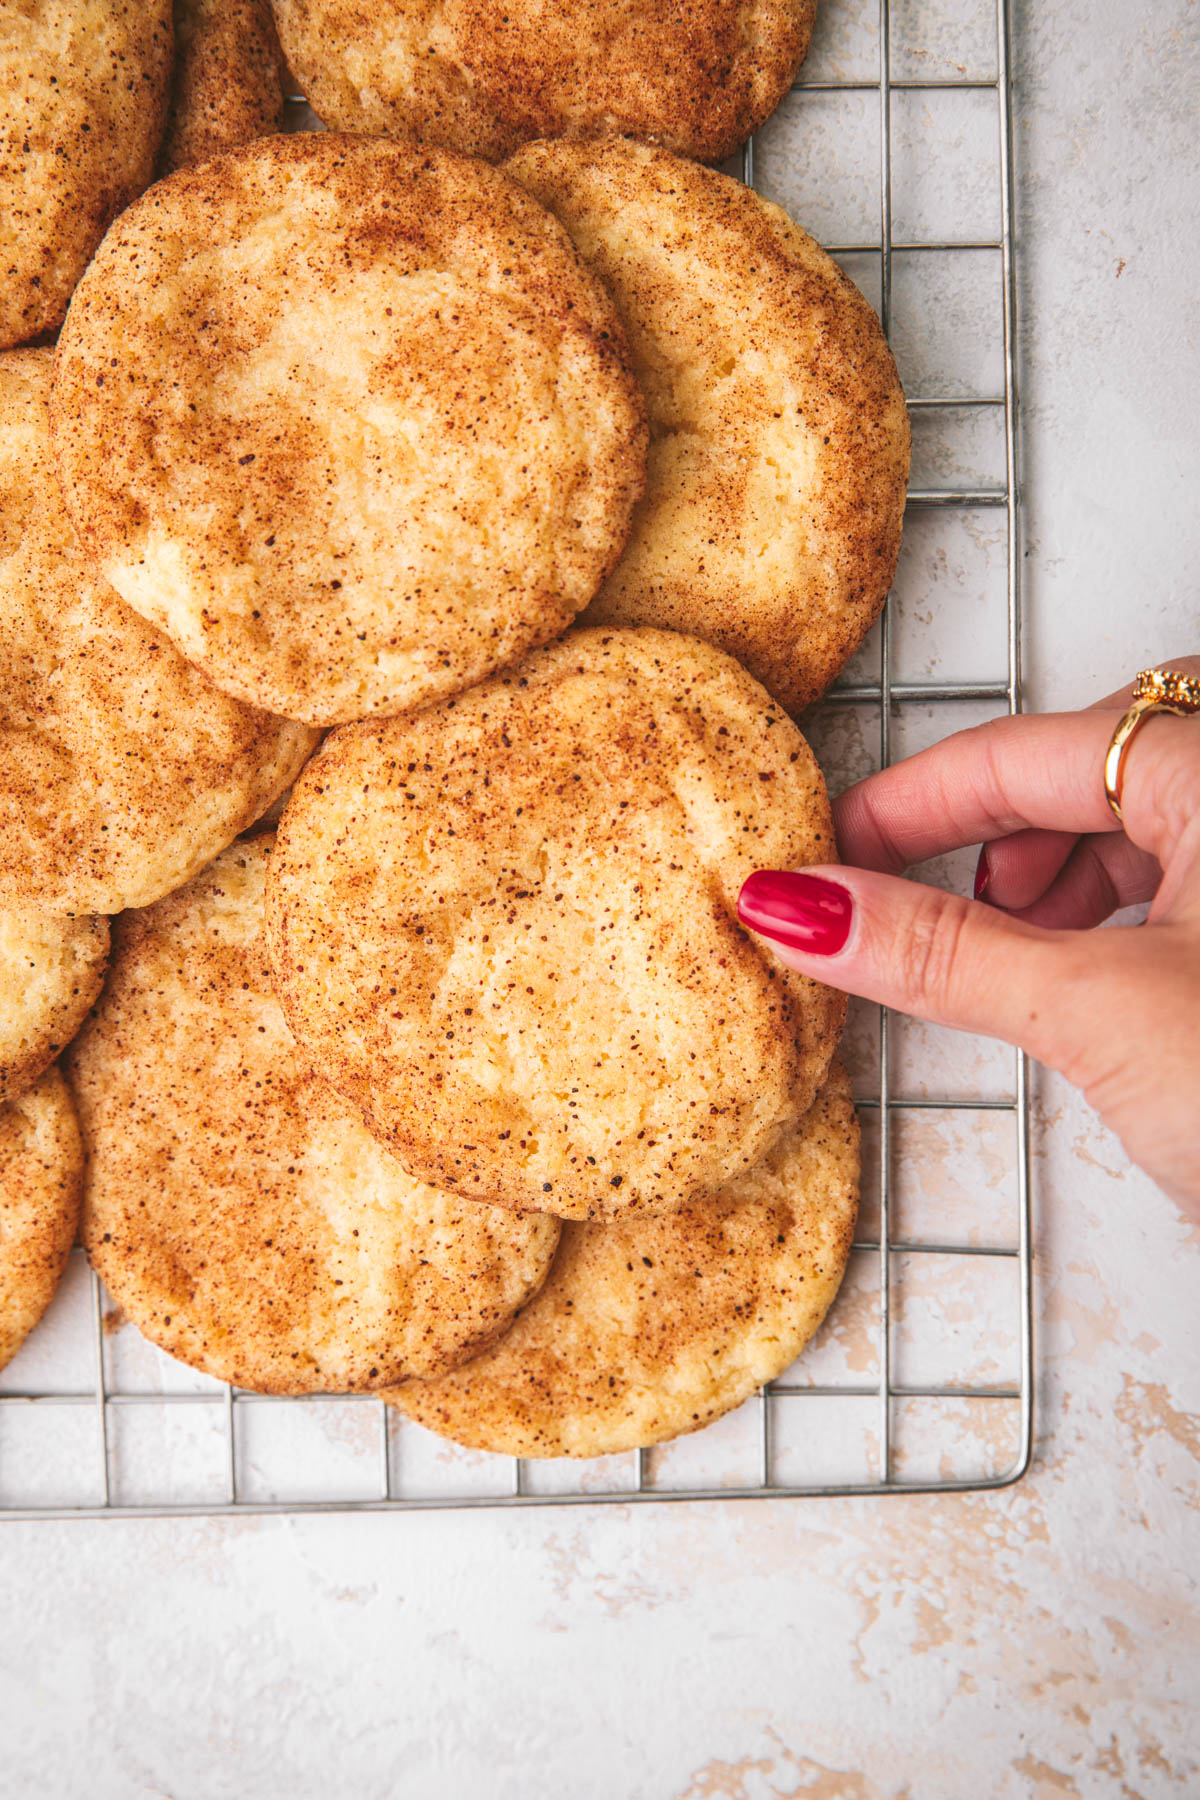 snickerdoodle cookies on baking sheet after baking with a hand grabbing one.